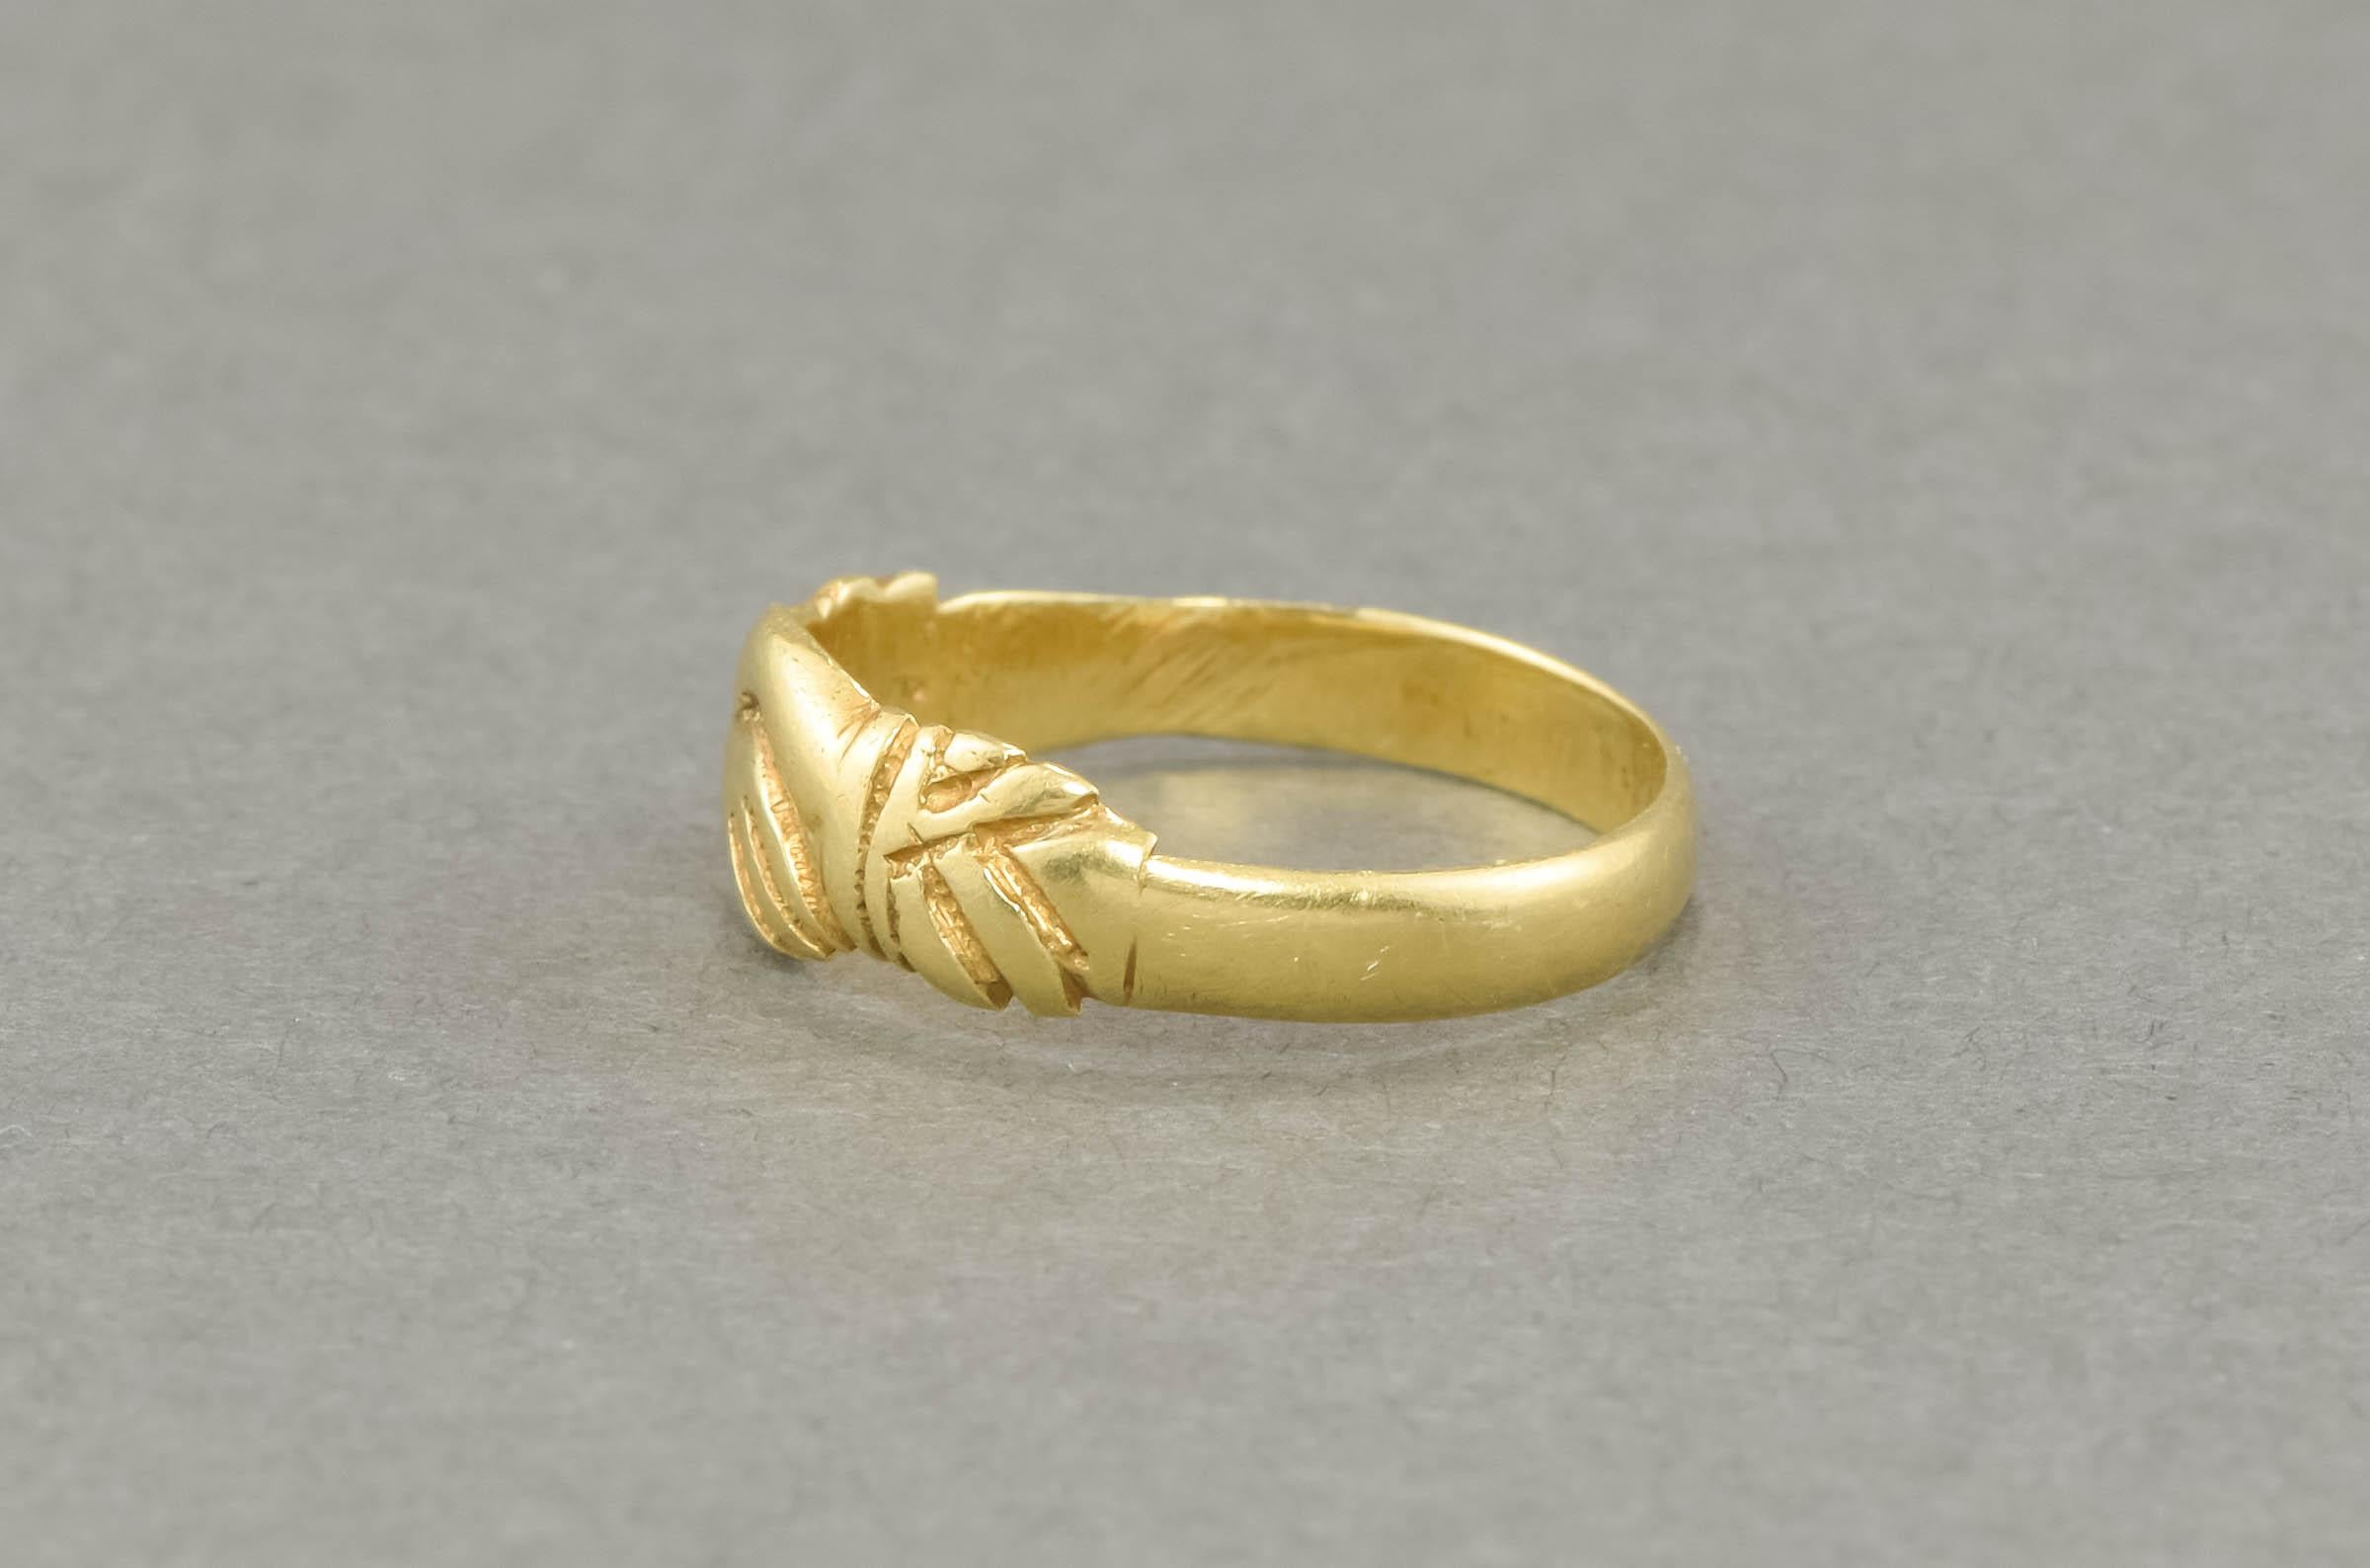 Georgian 18k Gold Fede Ring In Good Condition For Sale In Danvers, MA